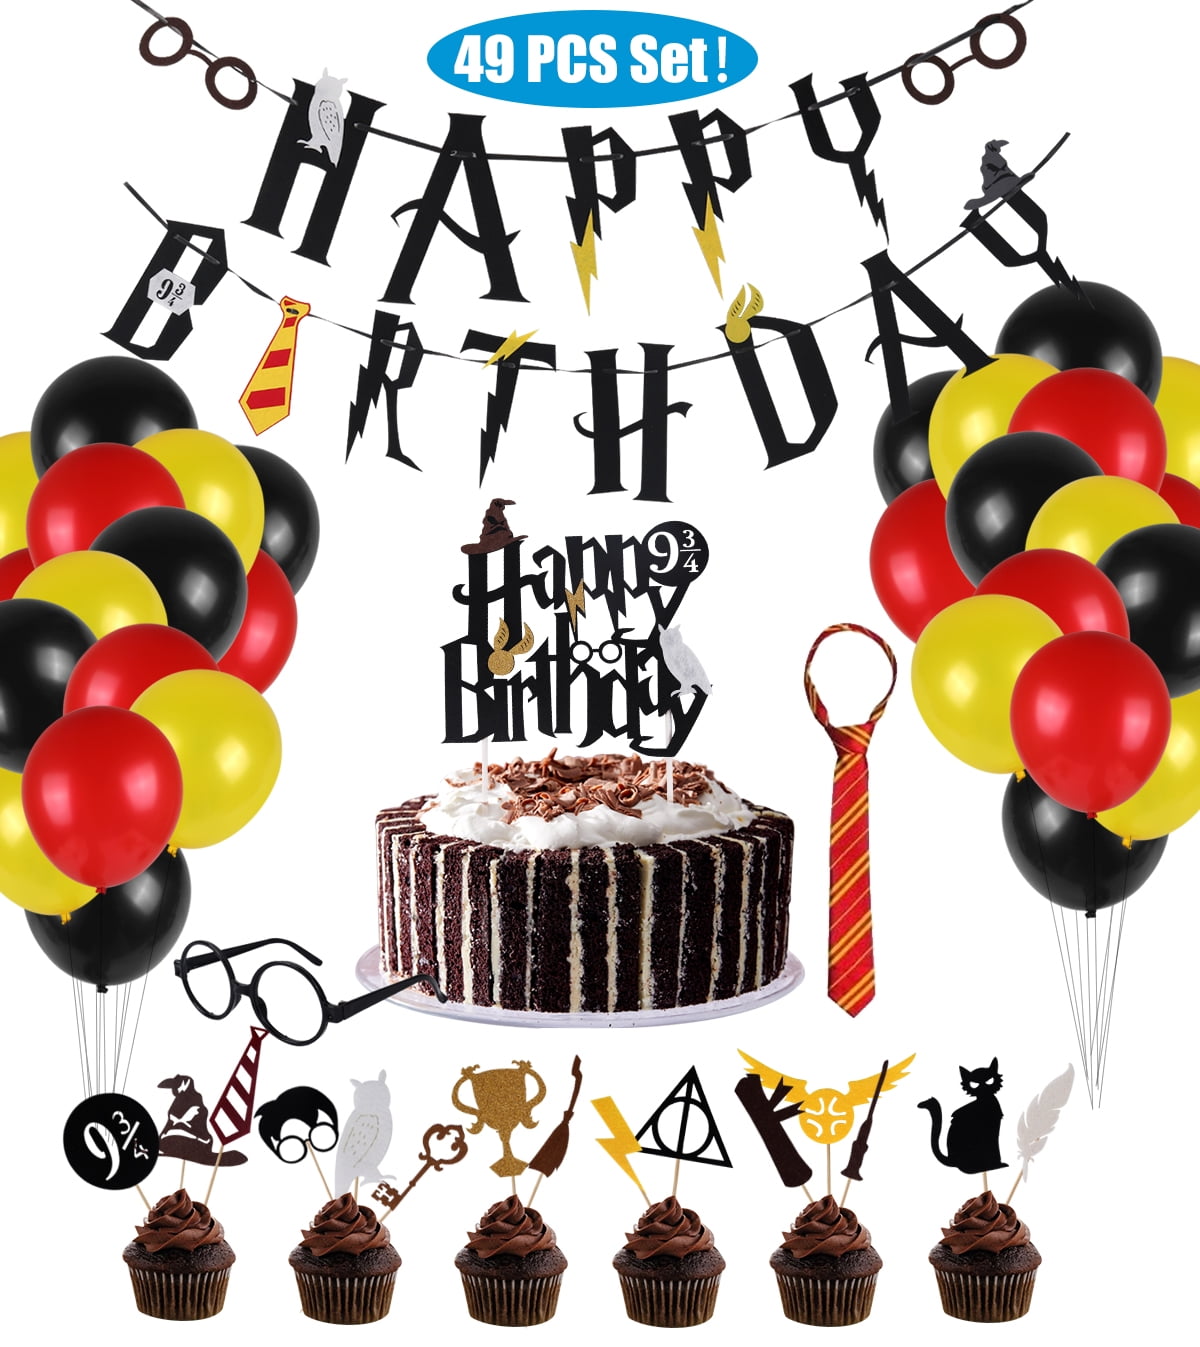 Harry Potter Birthday Party Supplies Decoration Bundle Pack for 16 Includes  Dessert Plates, Napkins, Table Cover, Happy Birthday Banner